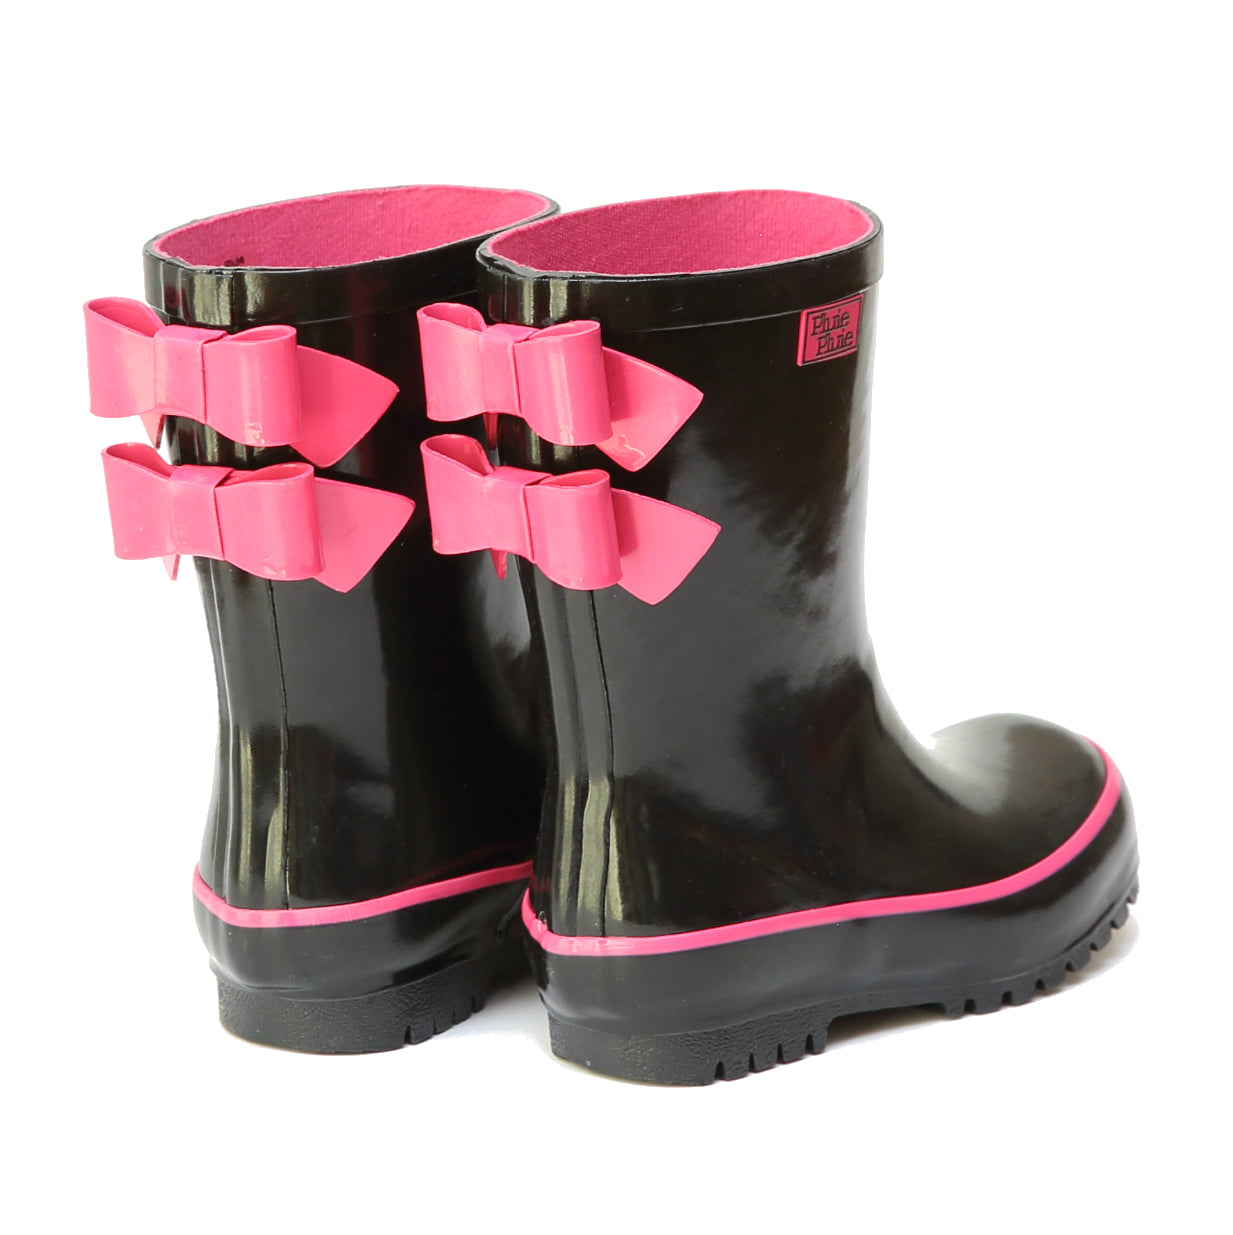 rain boots with bows on back